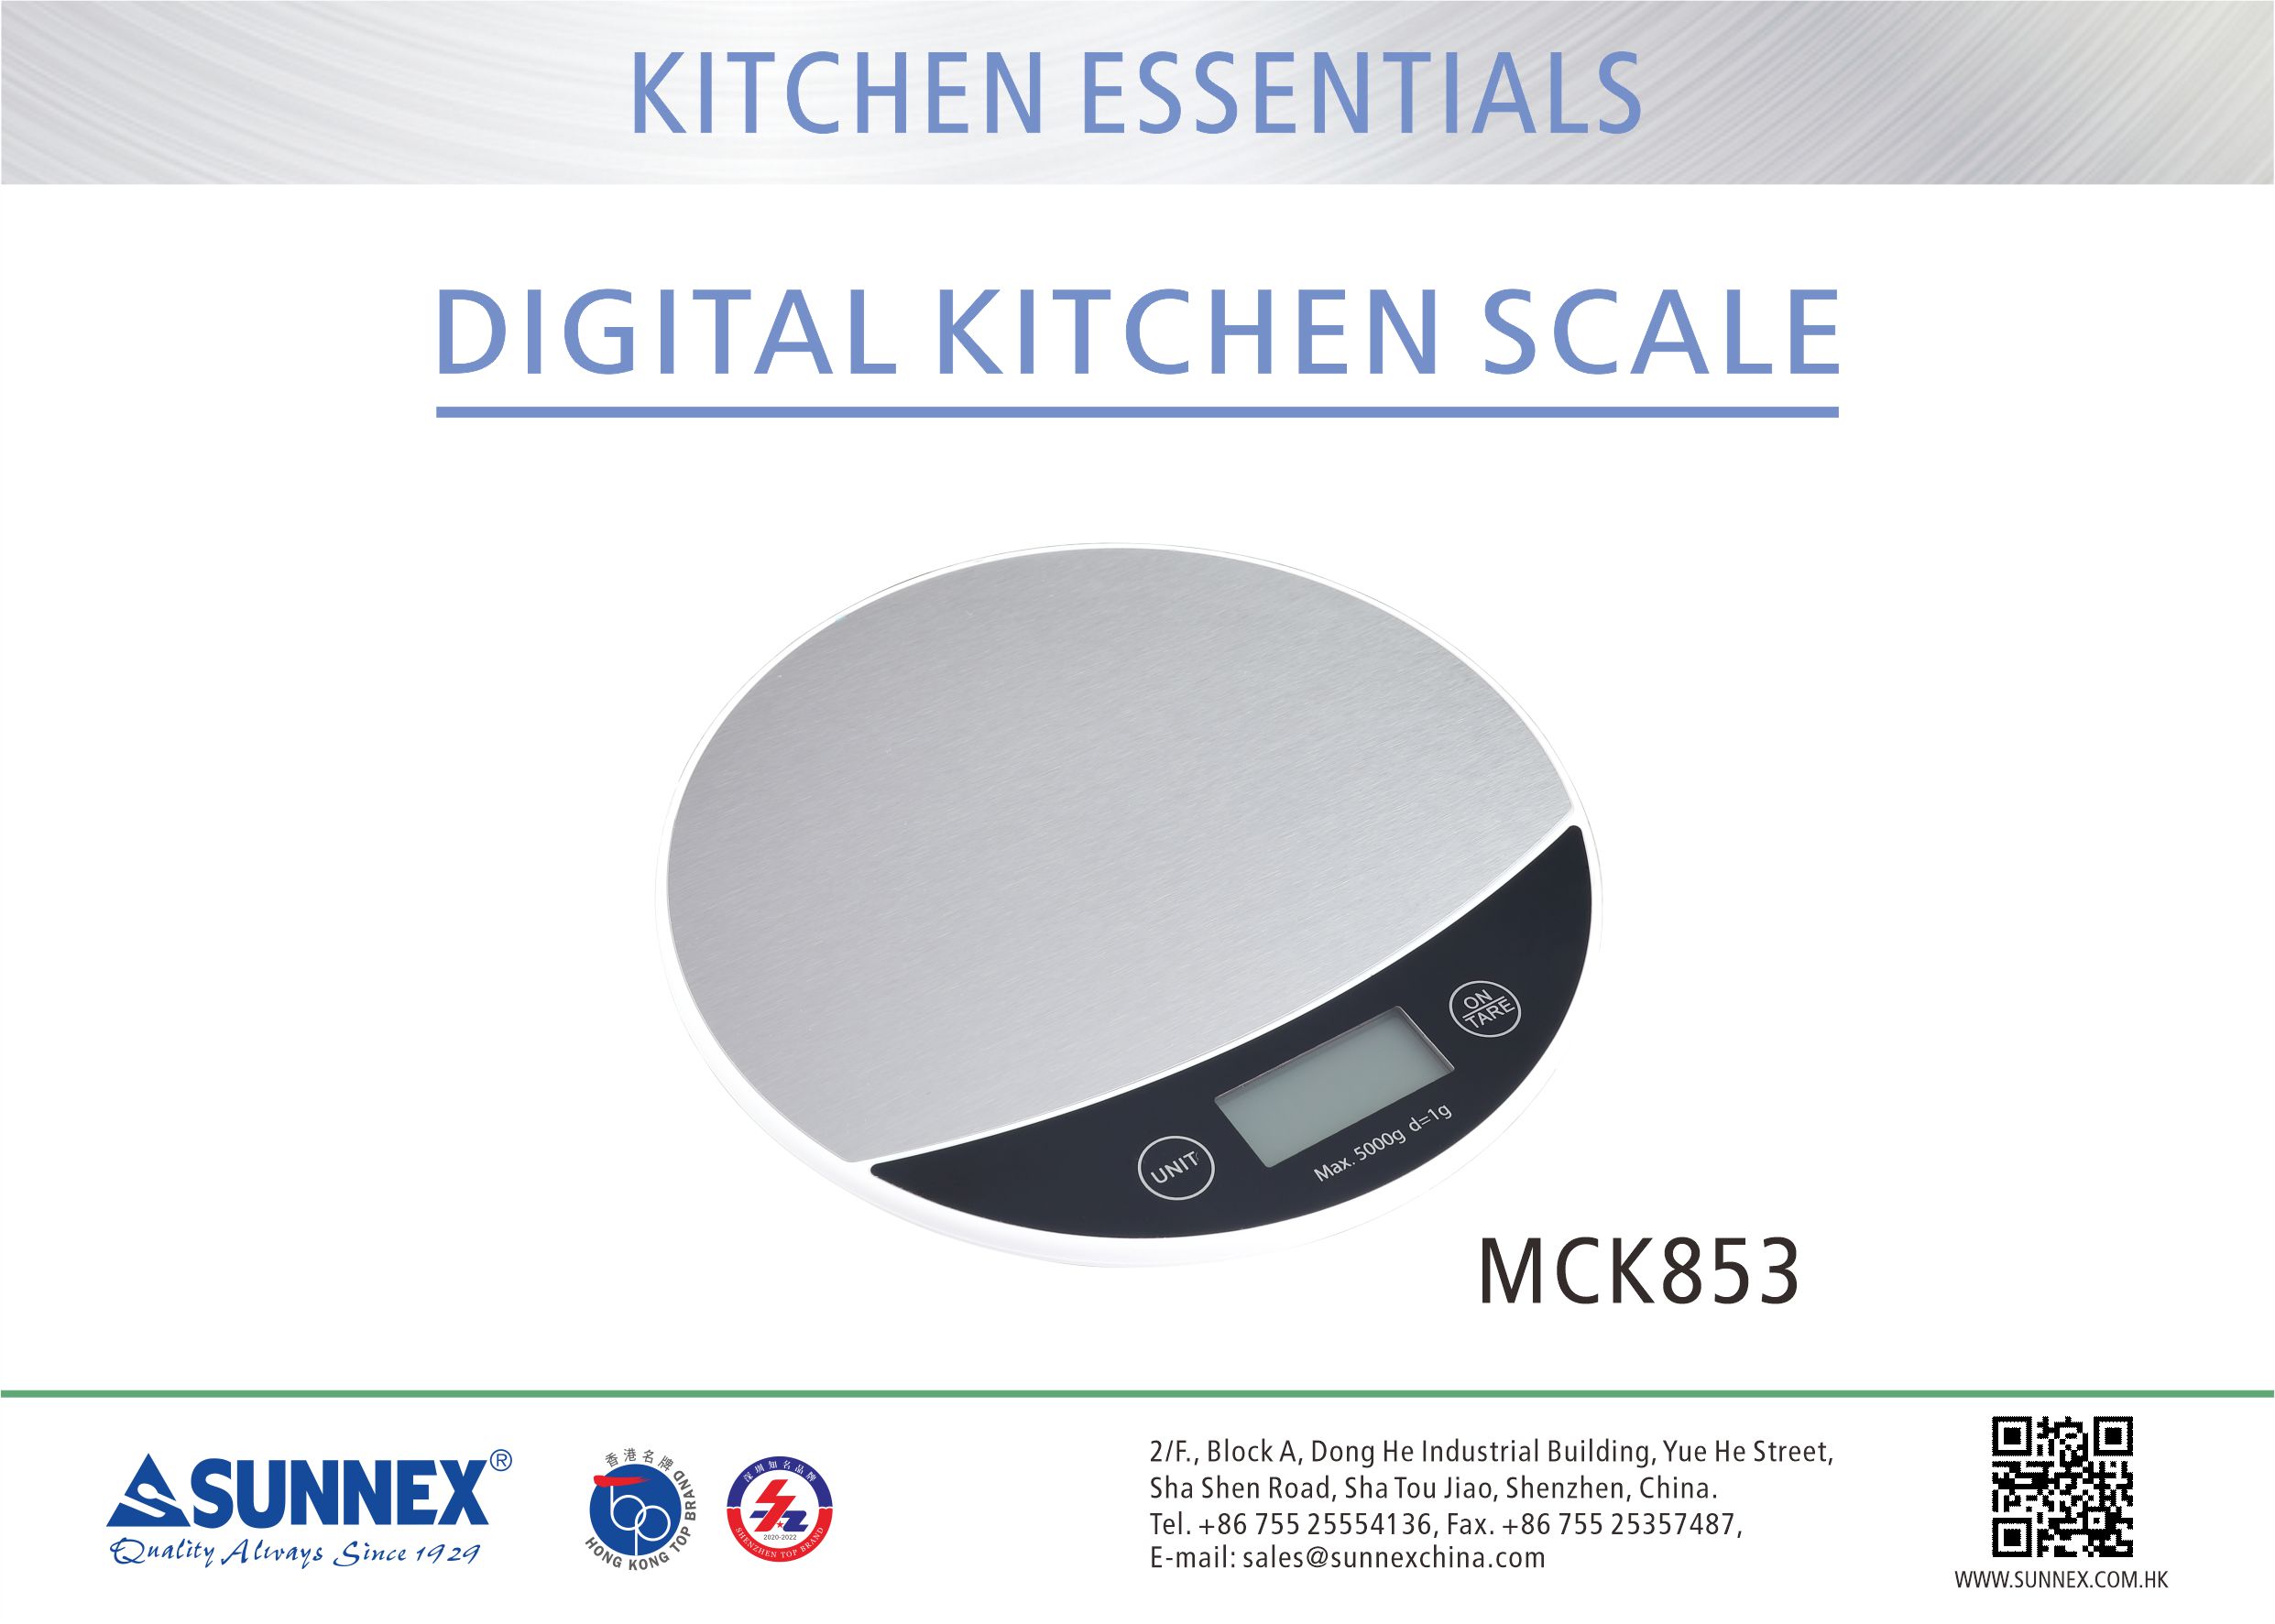 Partner of Kitchen, electrical appliances and table service----Digital Kitchen Scale